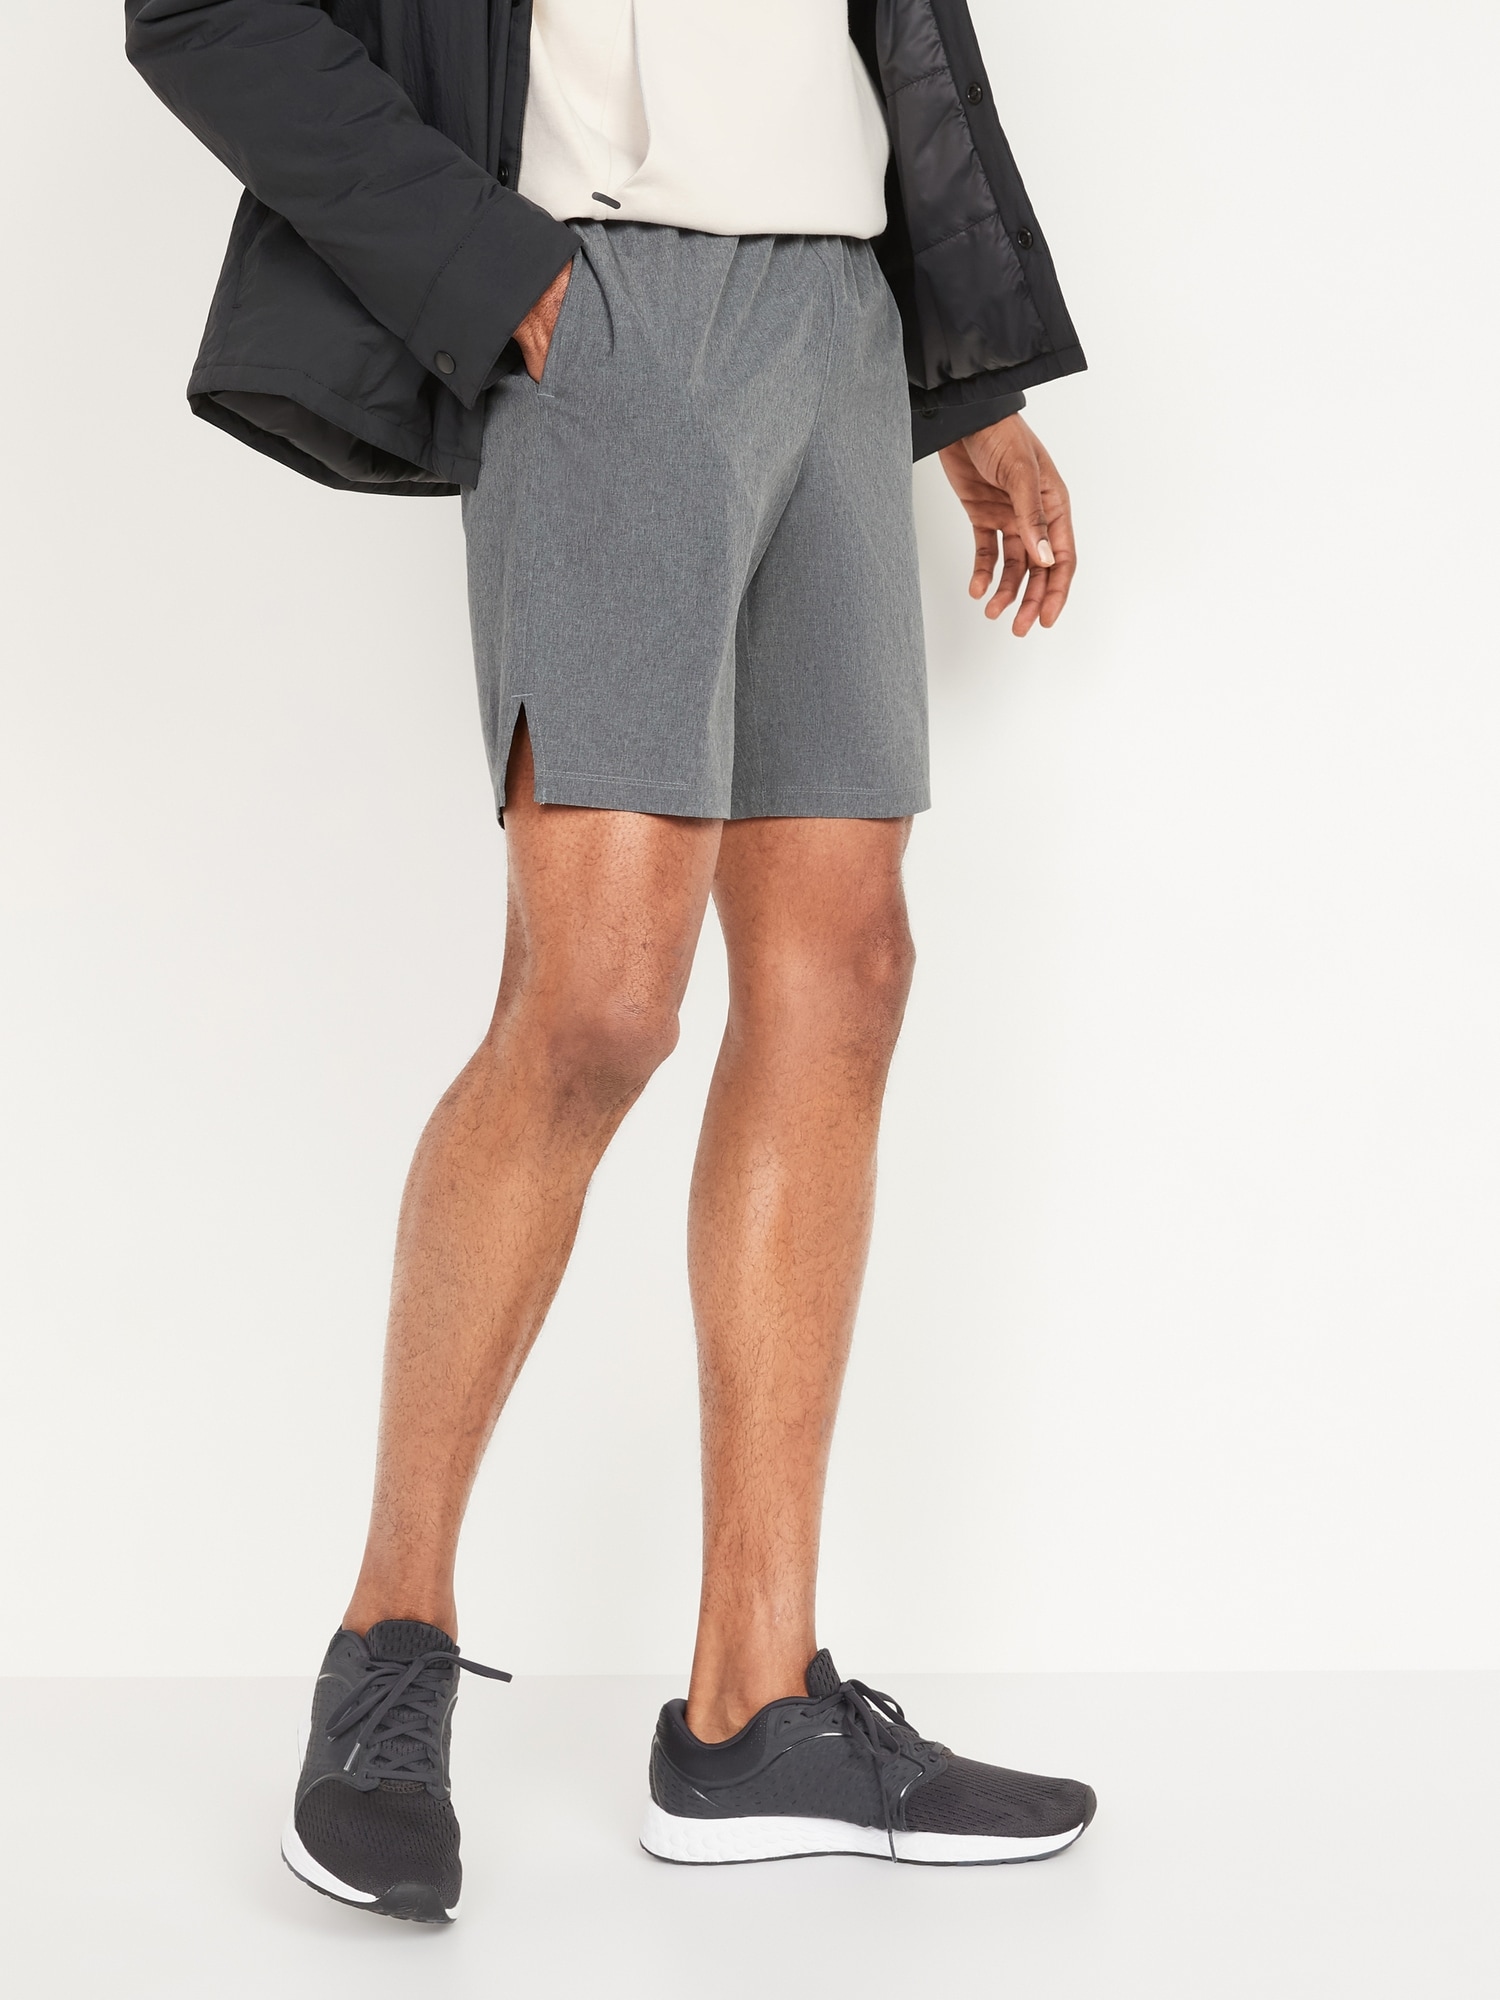 Old Navy Go Workout Shorts for Men -- 9-inch inseam